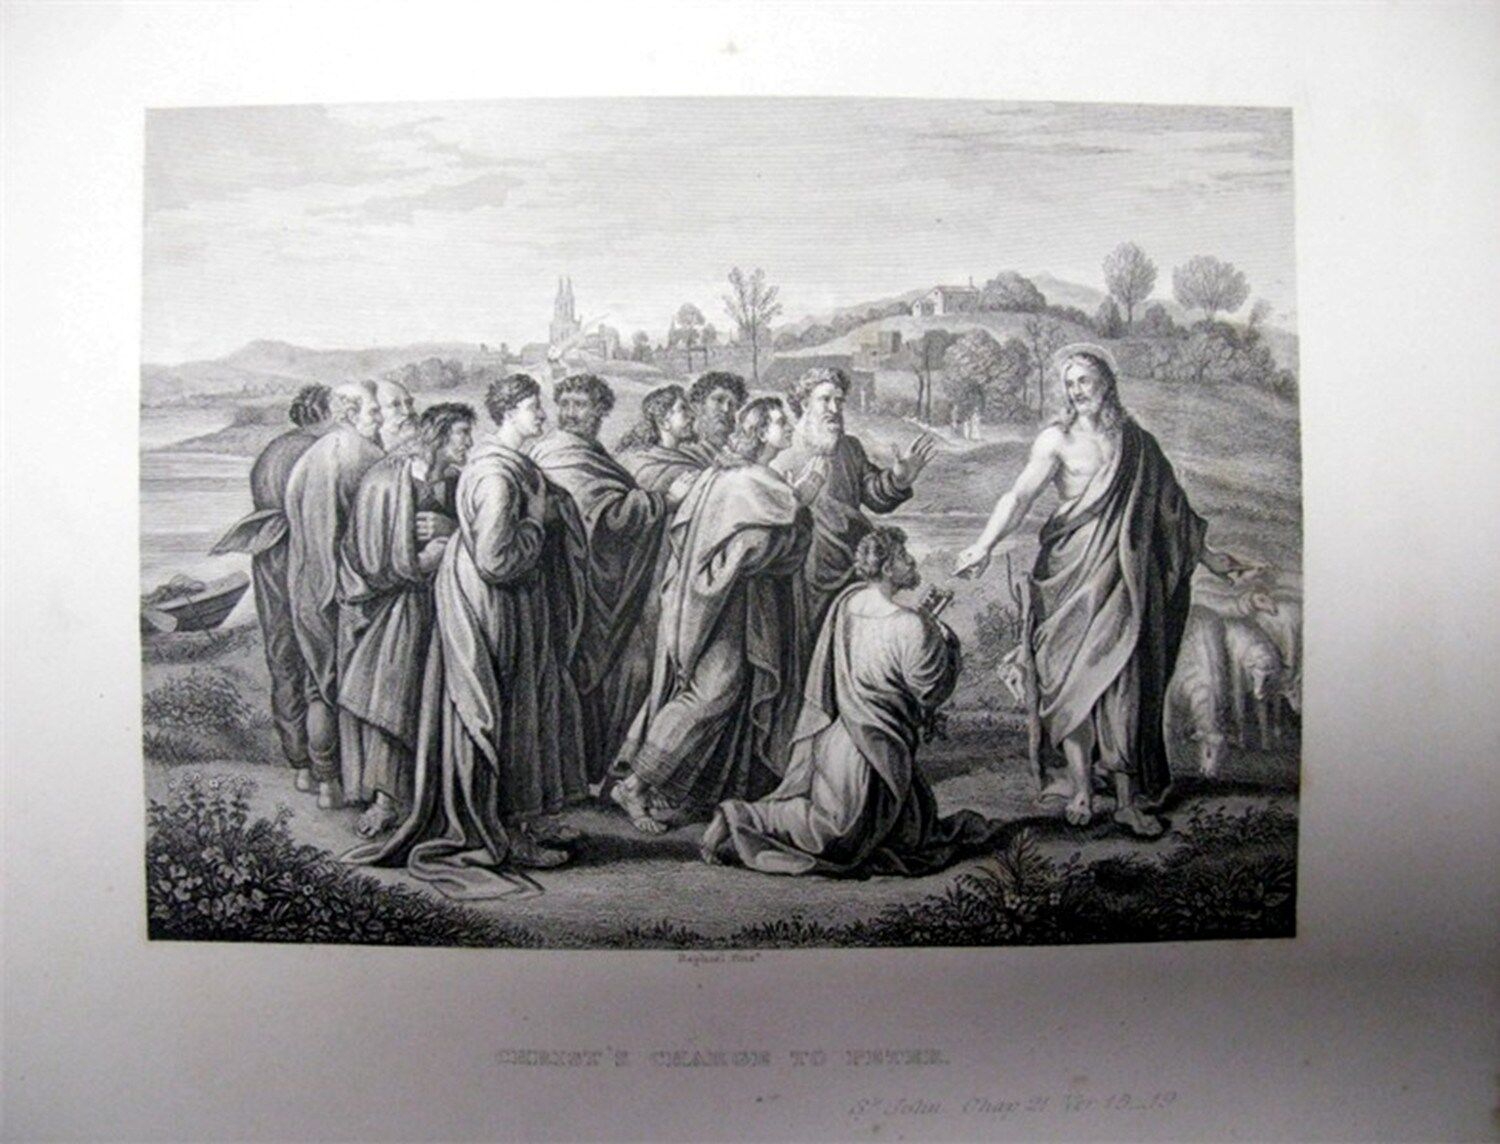 1838 BOOK PLATE PRINT PICTORAL HISTORY OF BIBLE BY RAPAHEL CHRISTS CHARGE PETER